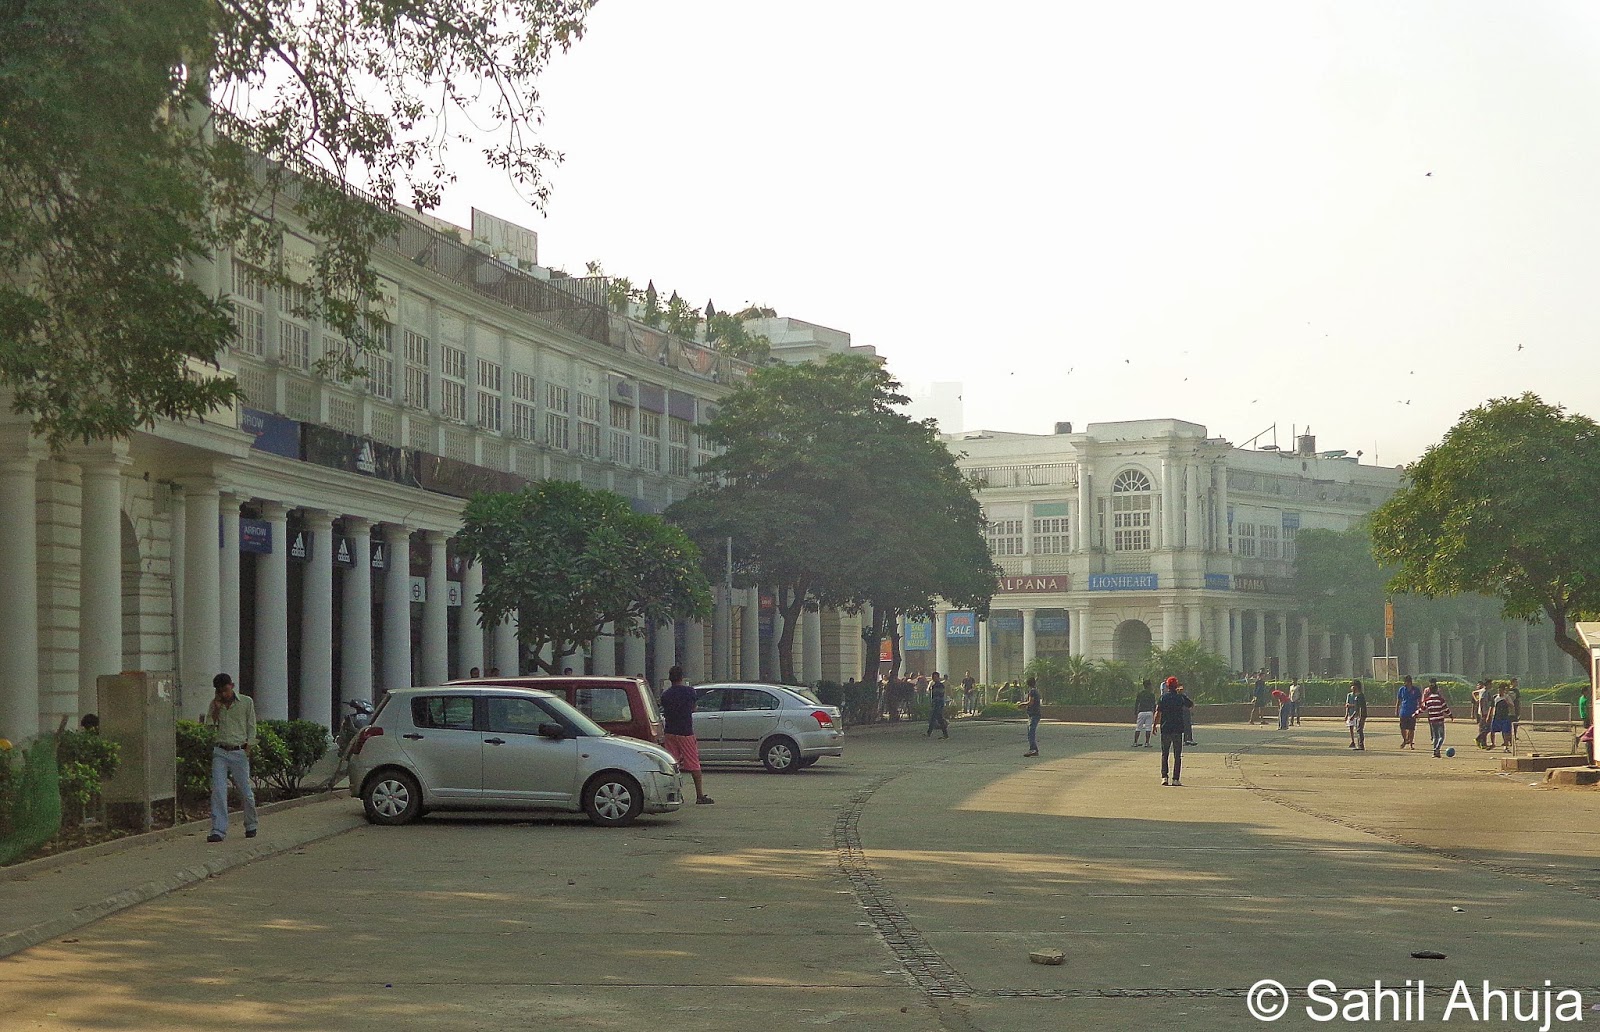 Pixelated Memories: Connaught Place, New Delhi